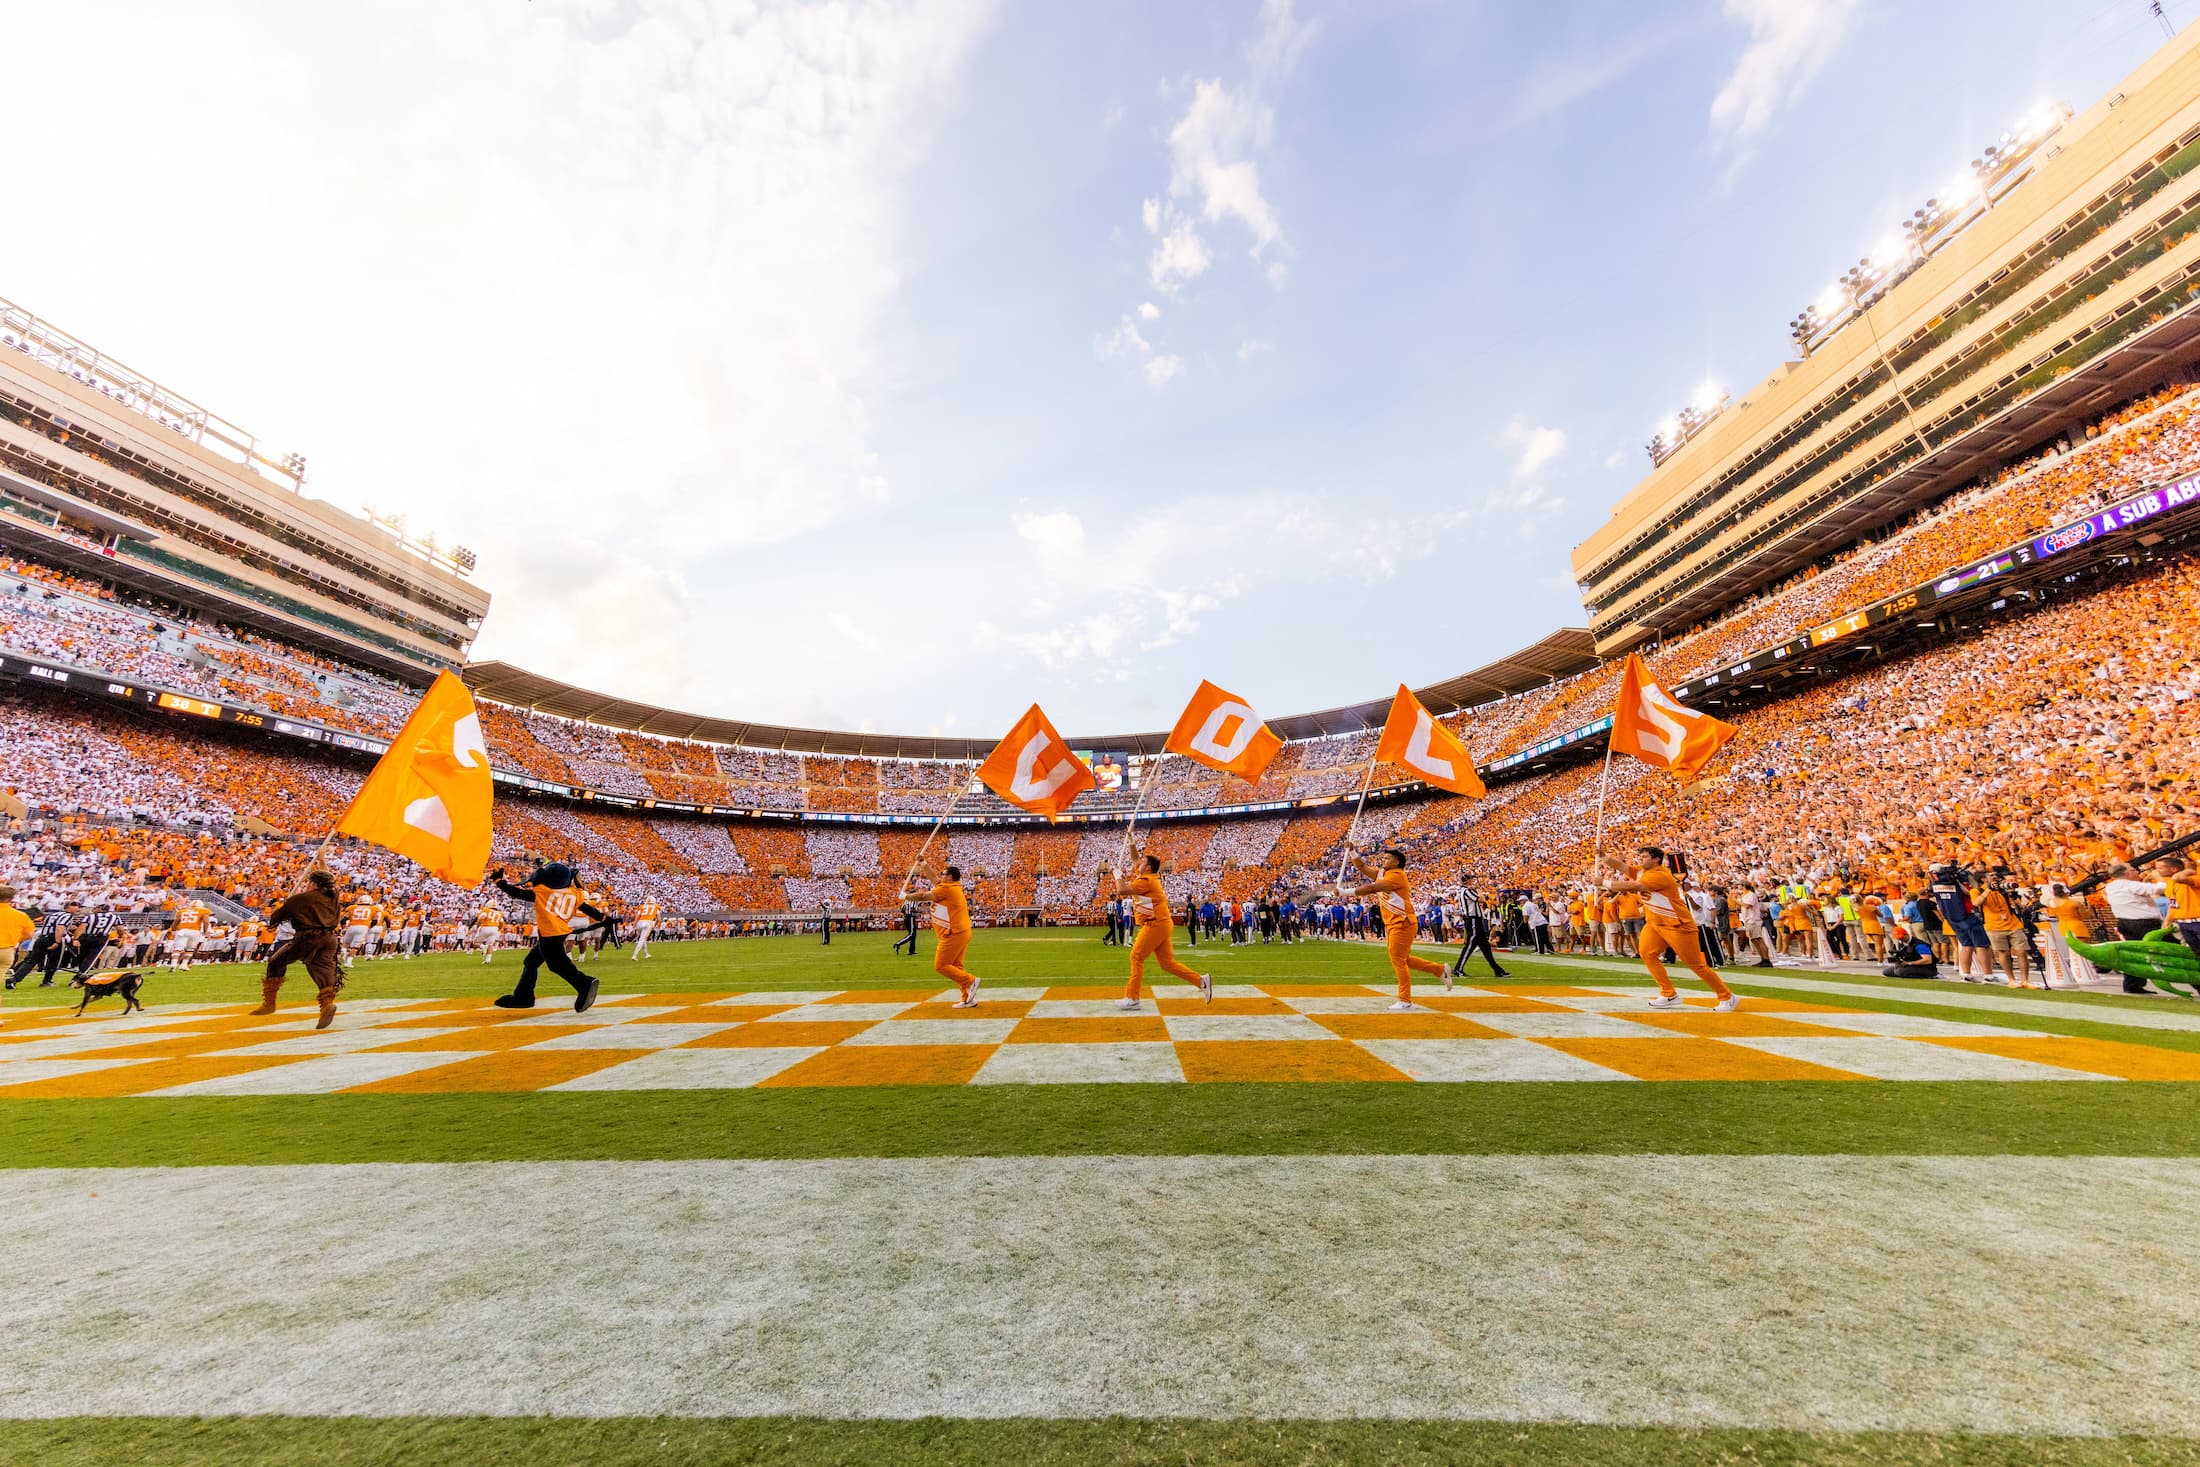 The UT Spirit Squad runs the VOLS lettes across the endzone after a score in front of checker boarded stadium during the Florida Gators and the Tennessee Volunteers football game at Neyland Stadium in Knoxville, TN